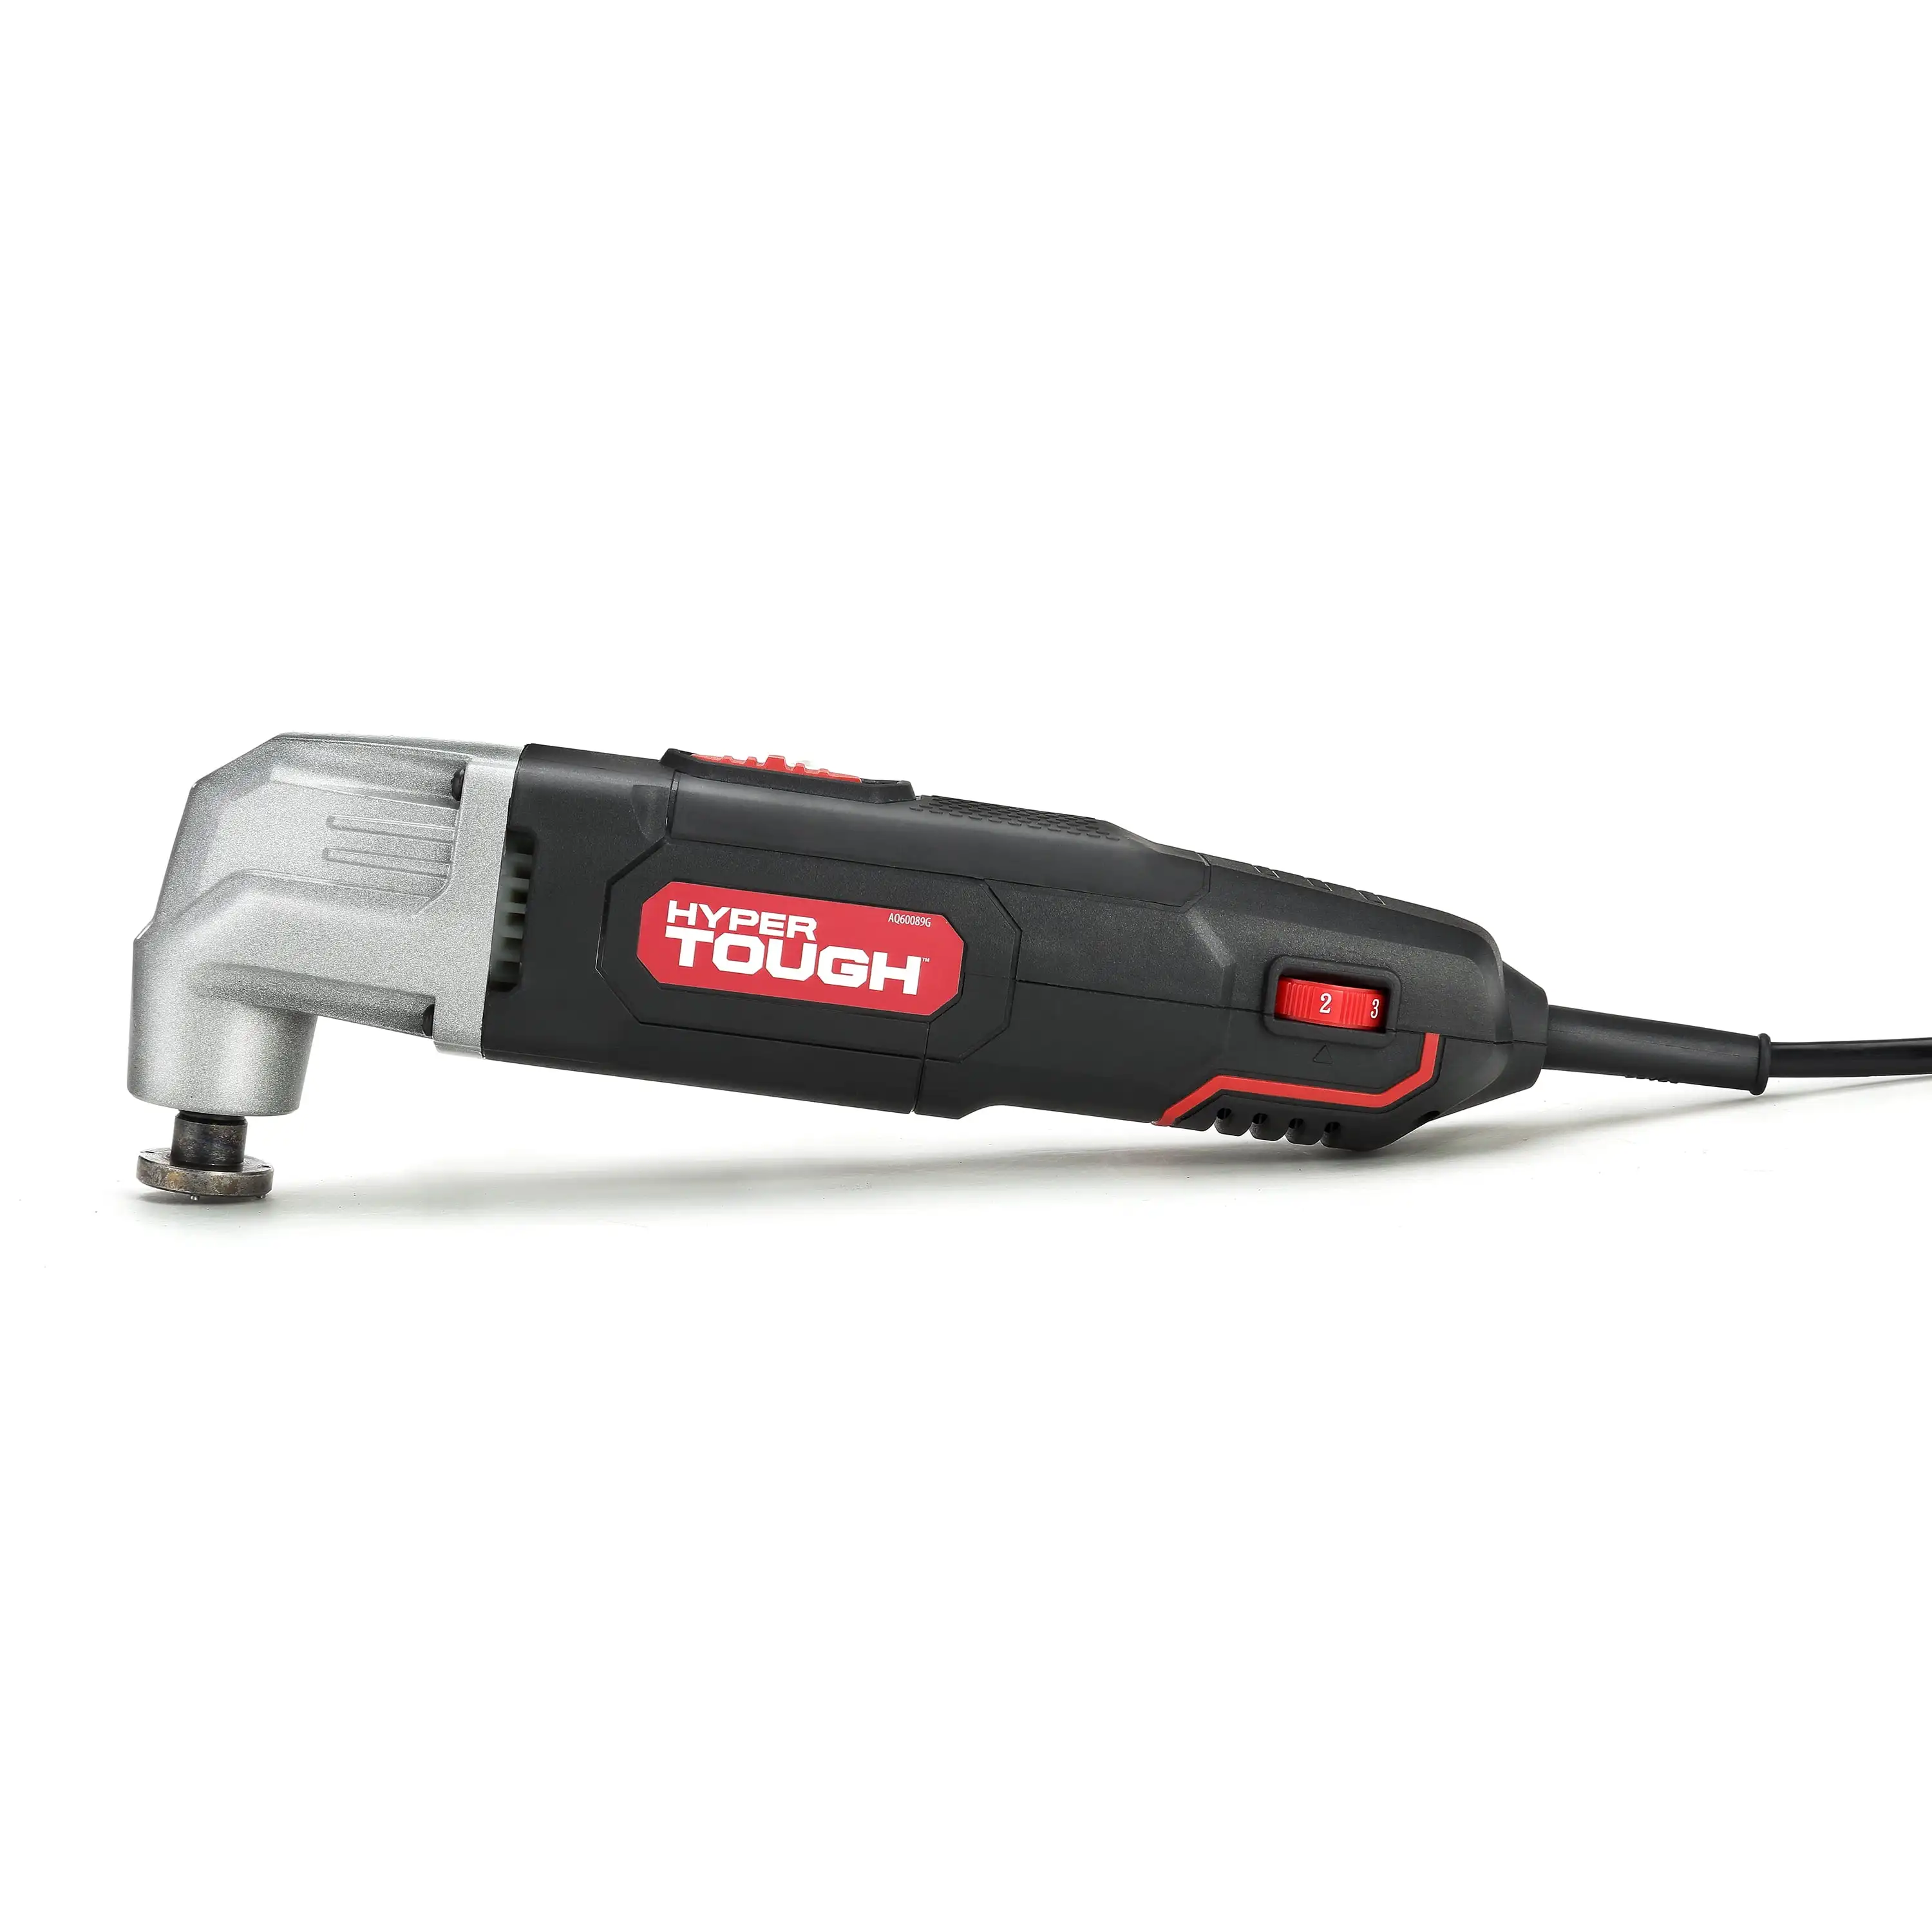 

Hyper Tough 2.1 Amp New Condition Corded Oscillating Multi-function Tool, Variable Speed, with Hex Key, Sanding Pad